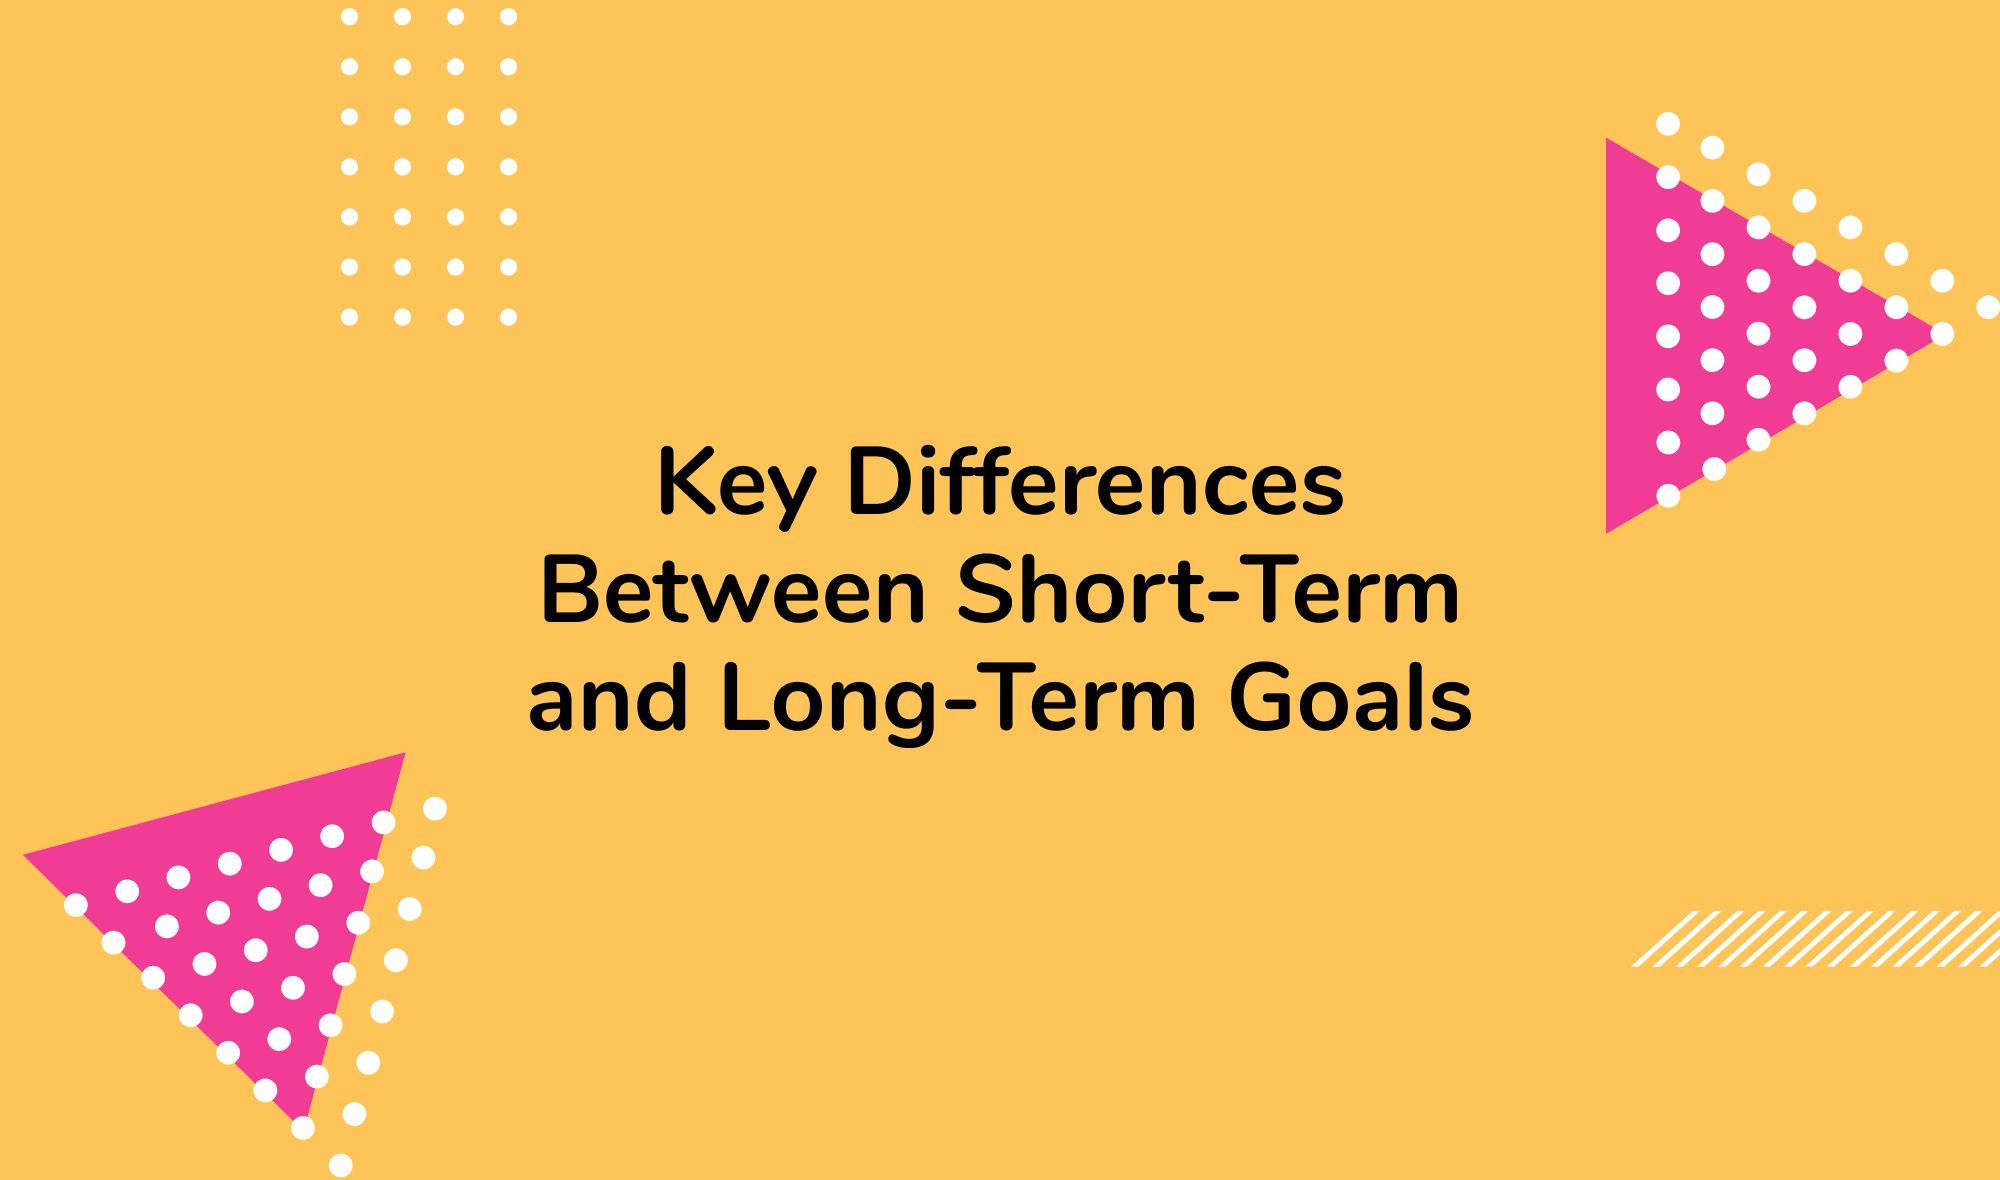 Key Differences Between Short-Term and Long-Term Goals